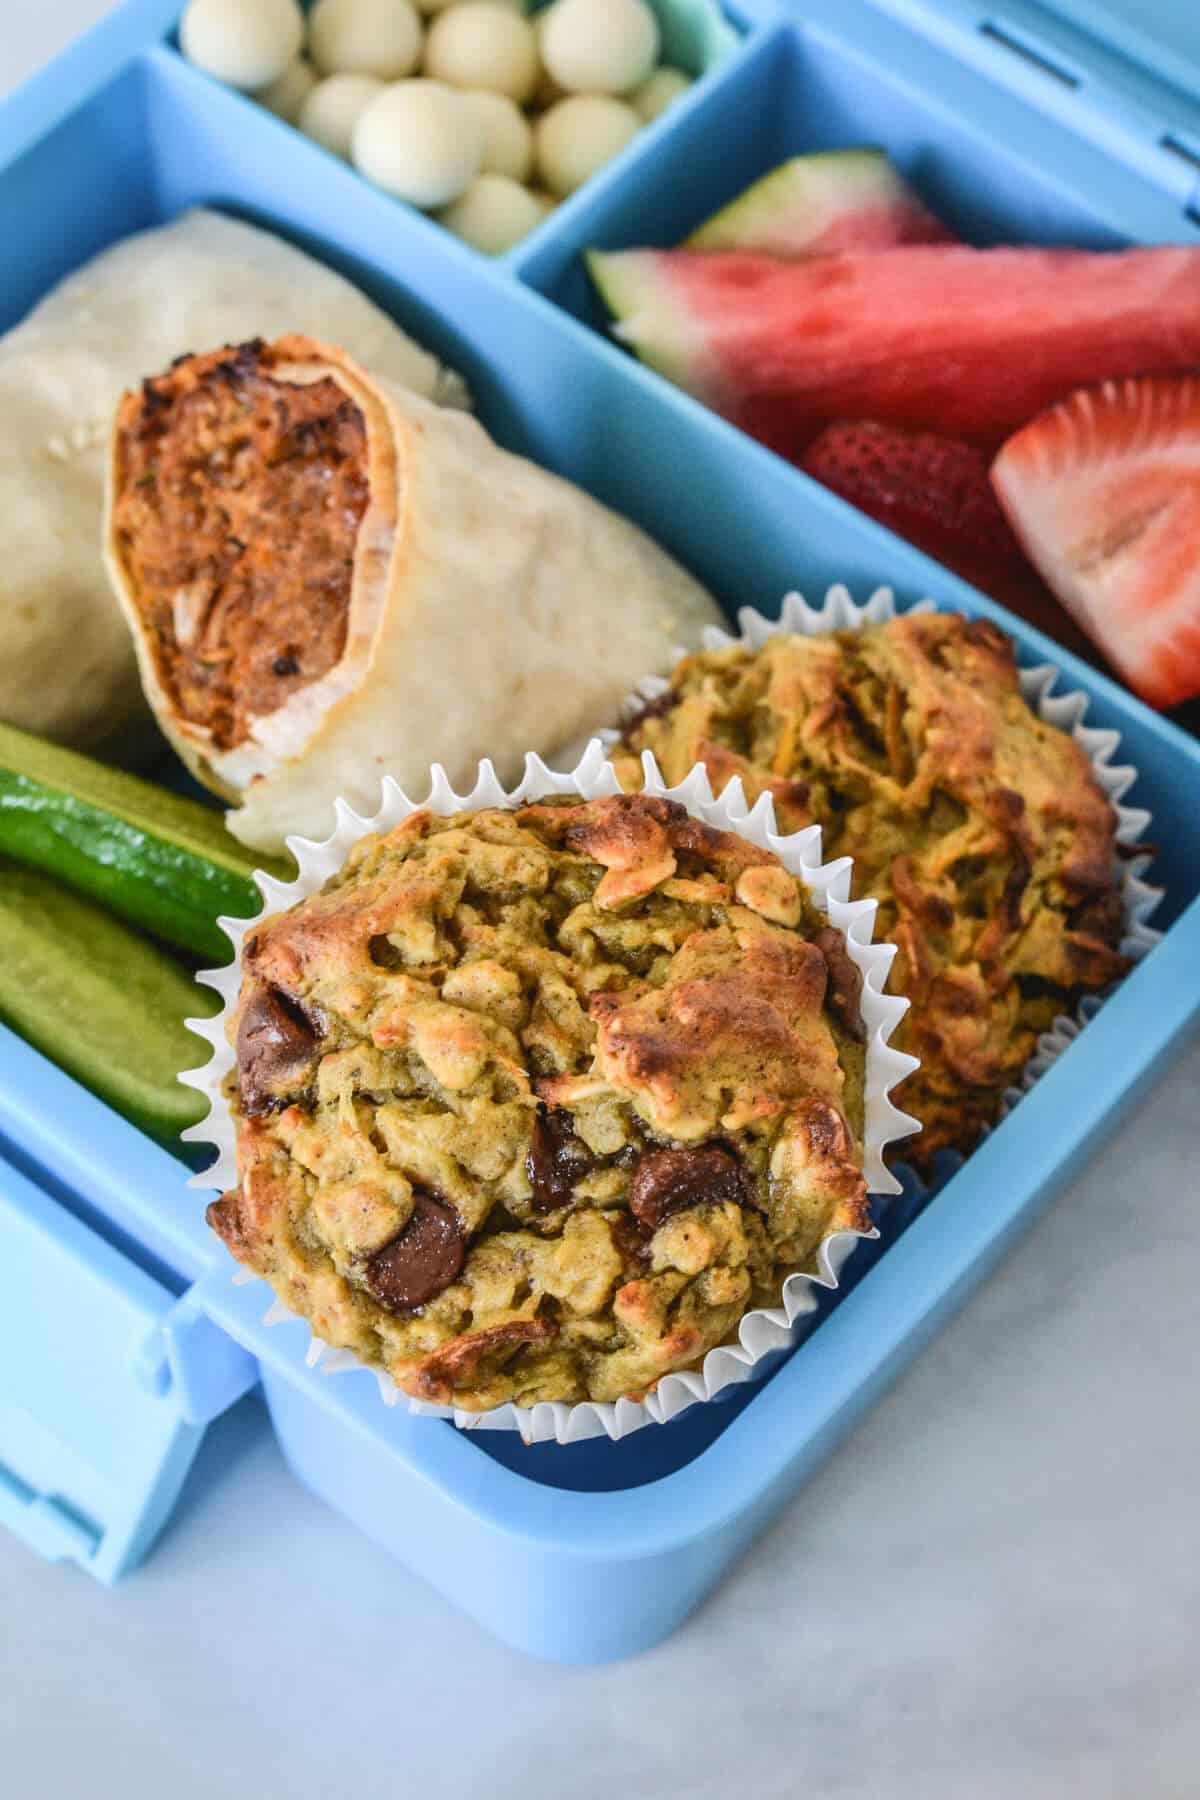 a blue lunchbox containing muffins and healthy foods